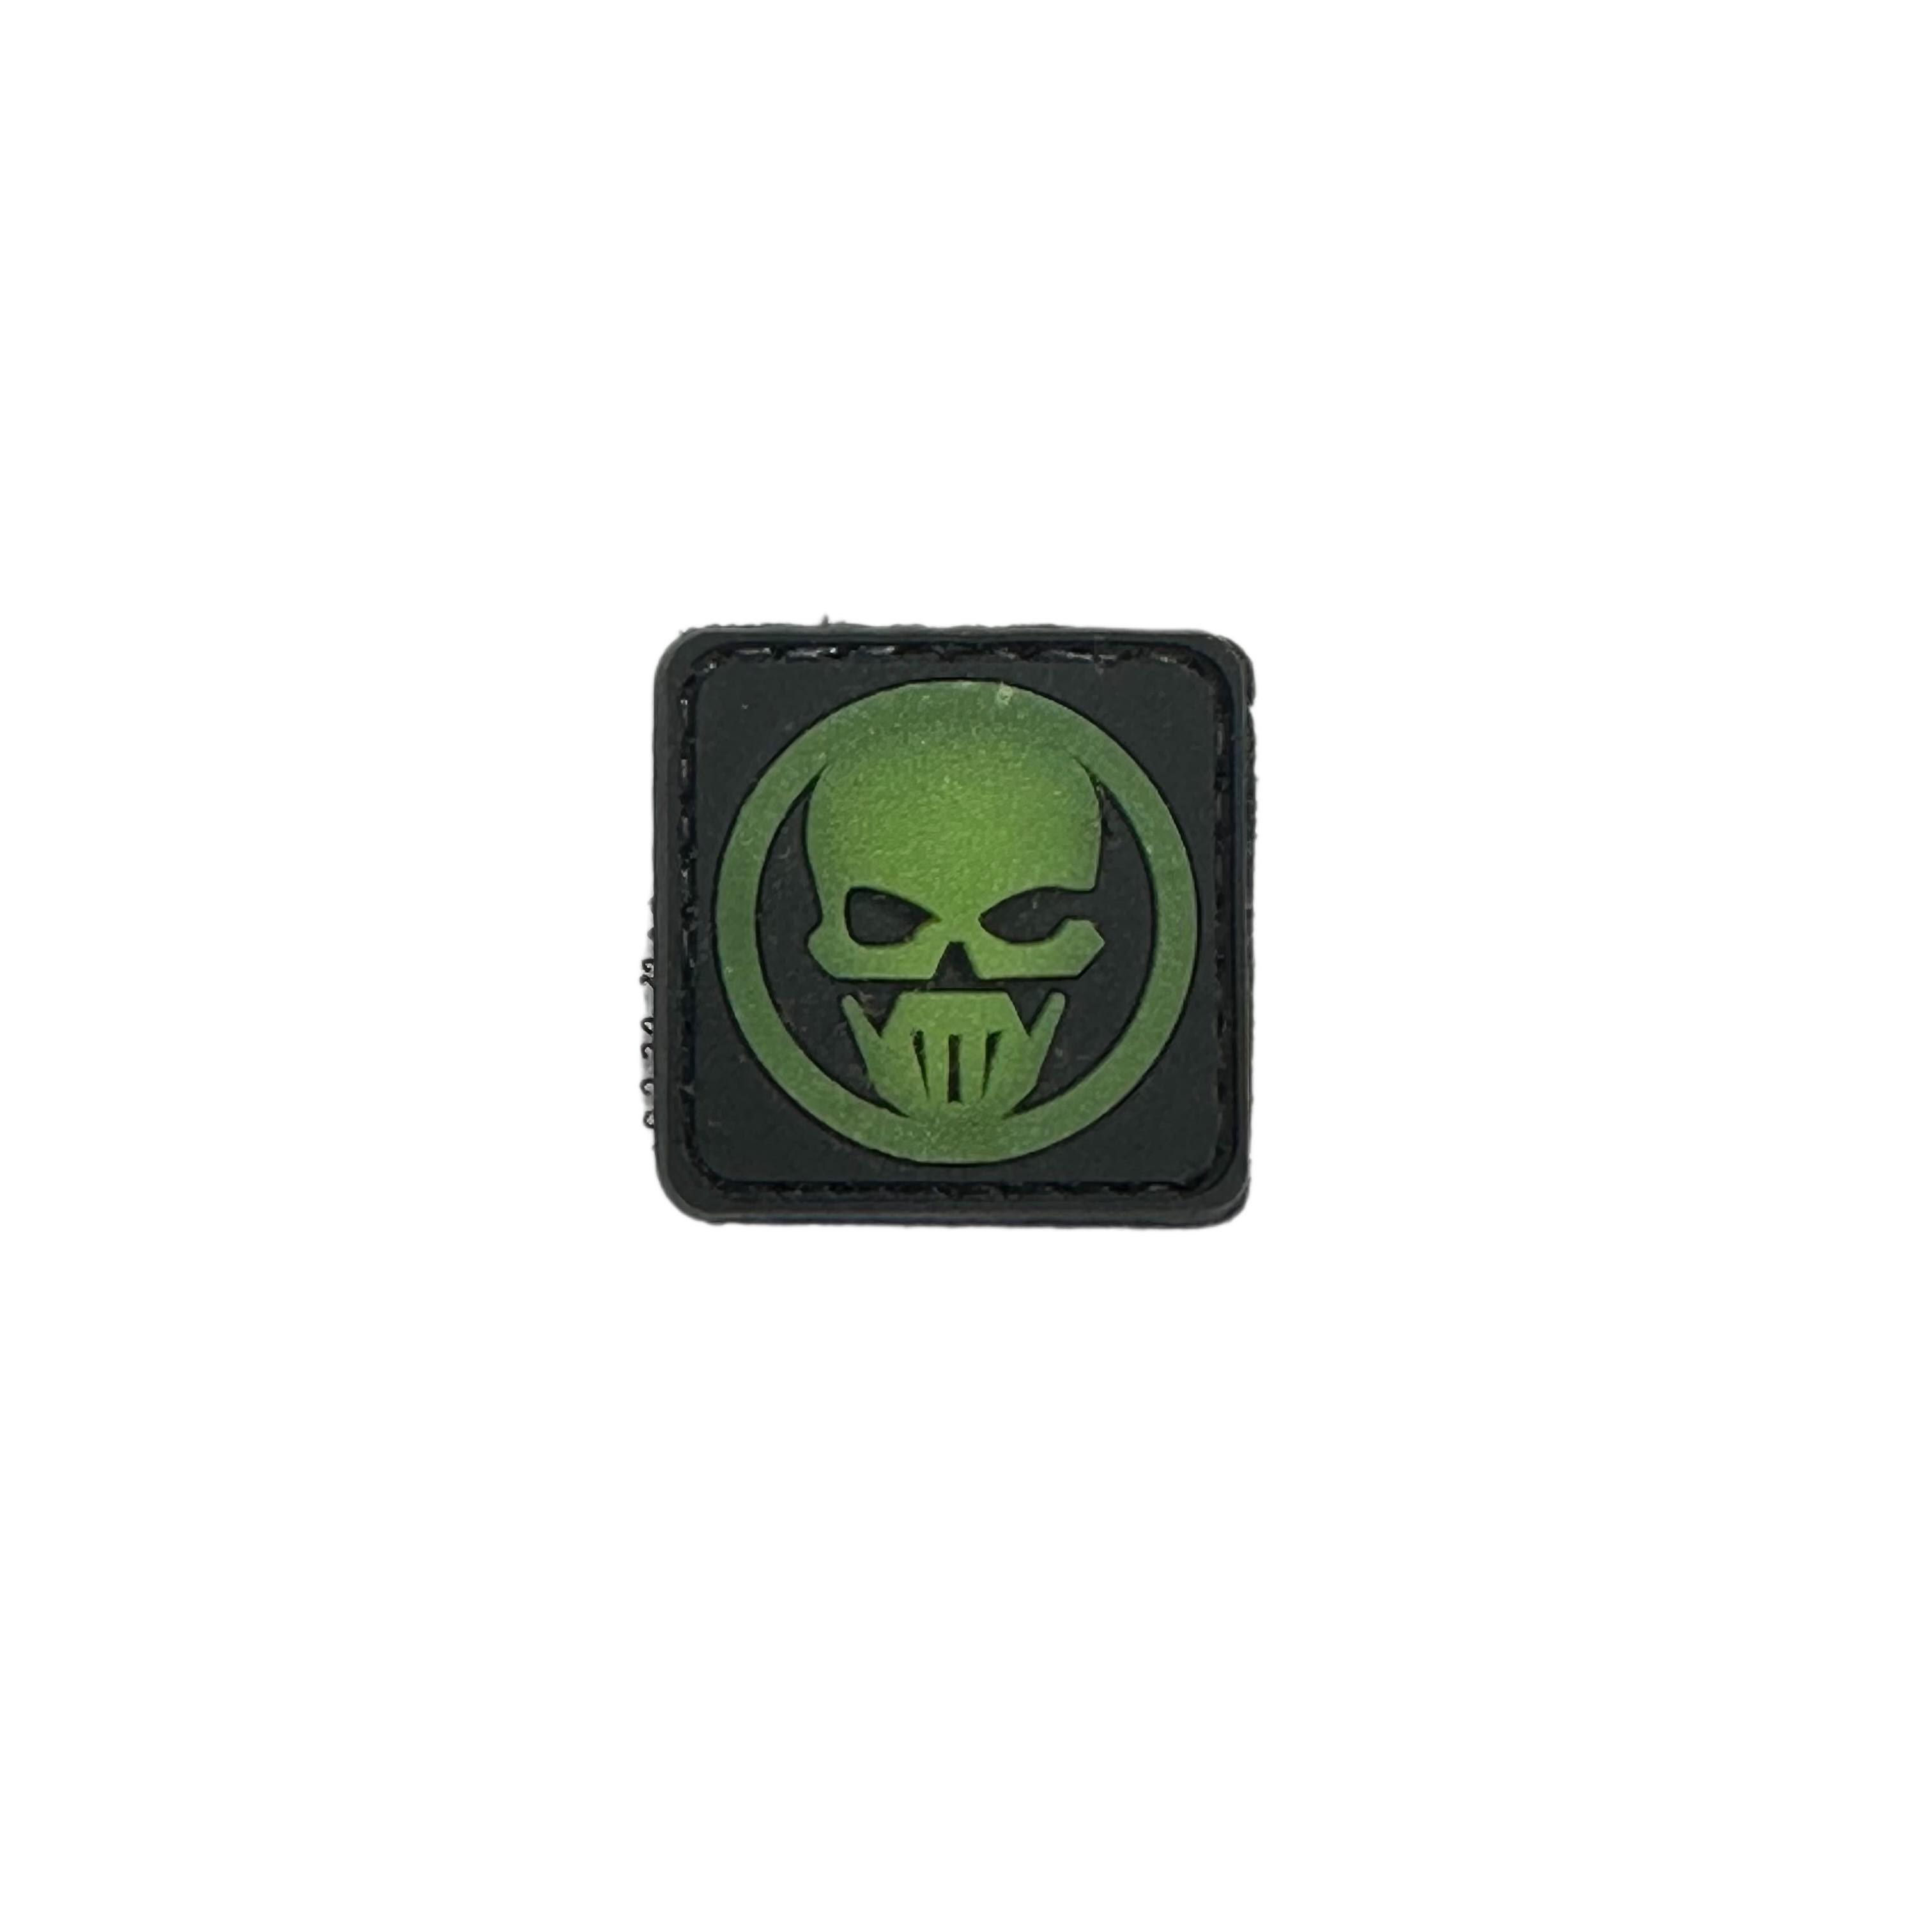 Rubber Patch - Ghost Recon Skull (Glow)